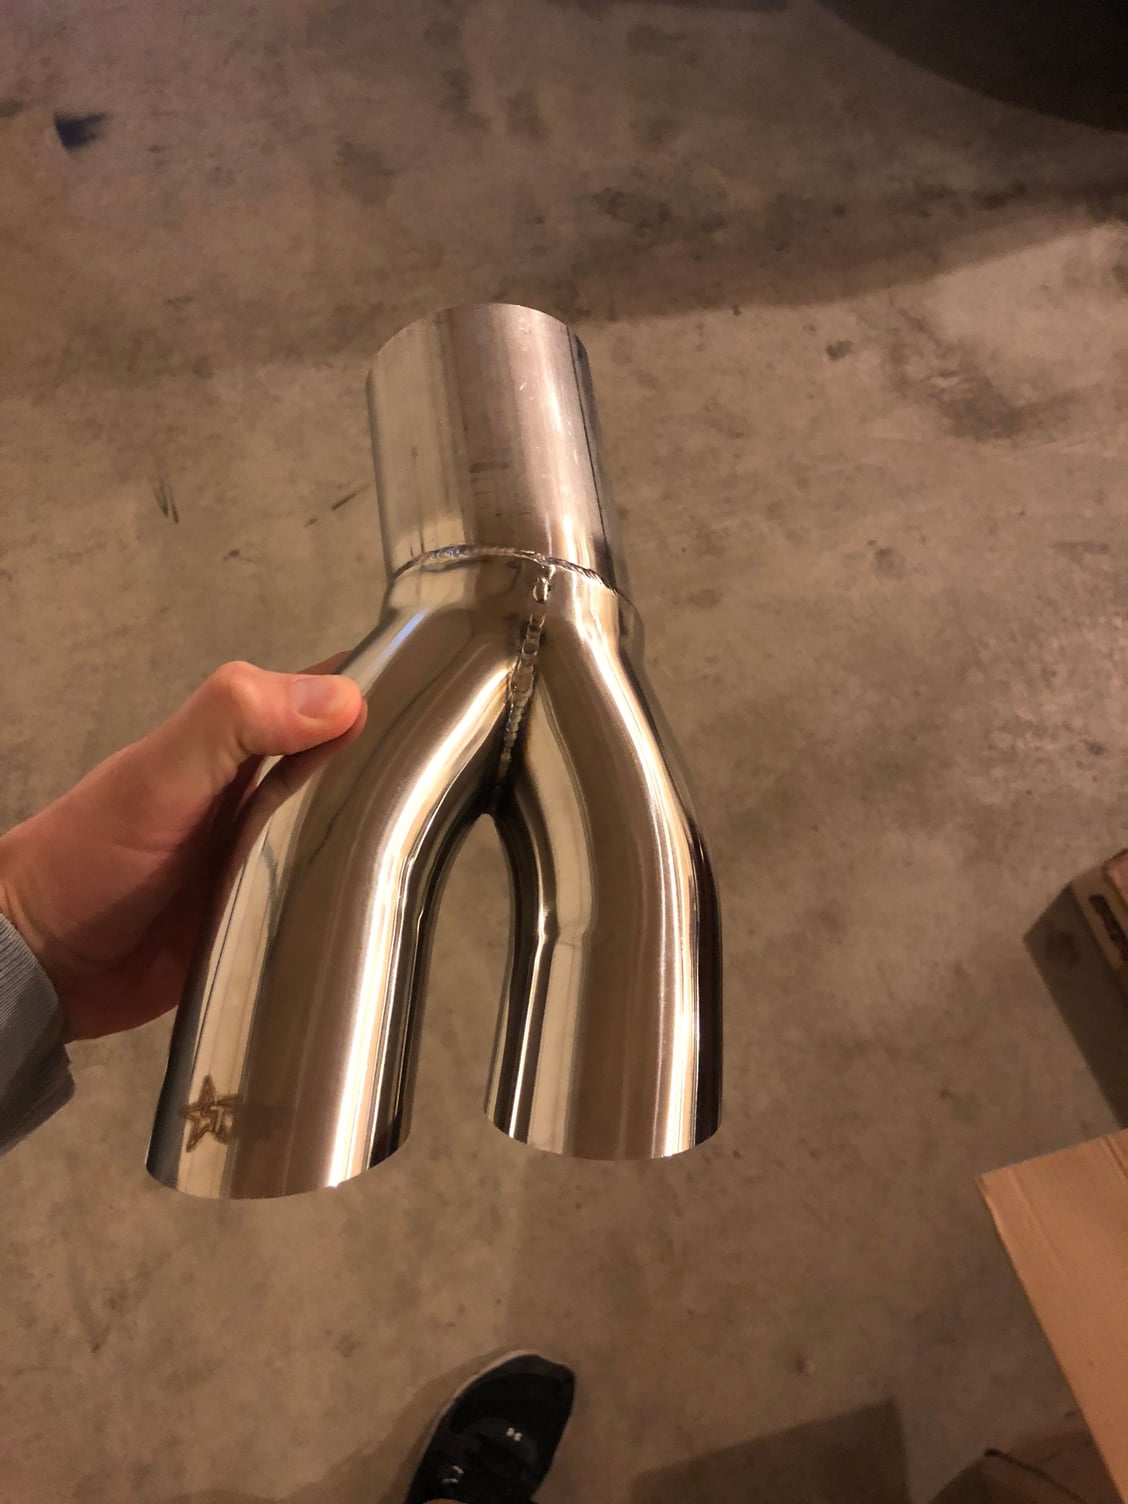  - NEW exhaust tips (quads) - Jefferson City, MO 65109, United States